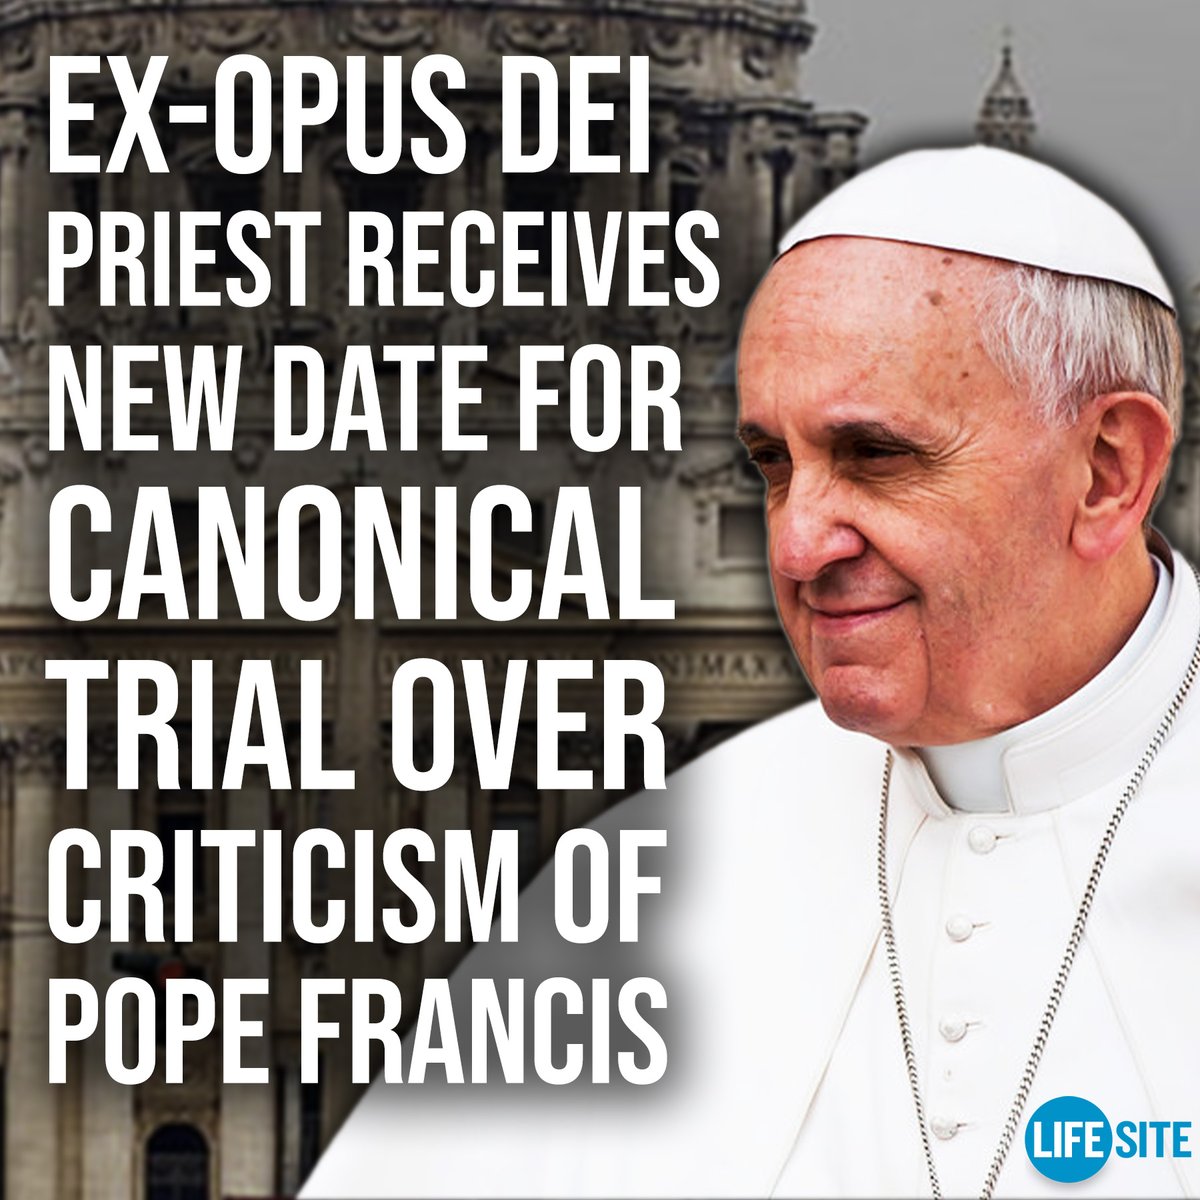 According to an email obtained by LifeSiteNews, Fr. @fatherjesusmary may be removed from the priesthood for having continued to point out @Pontifex’s theological novelties in public. MORE: lifesitenews.com/news/ex-opus-d… #PopeFrancis #CatholicTwitter #CatholicChurch #Vatican